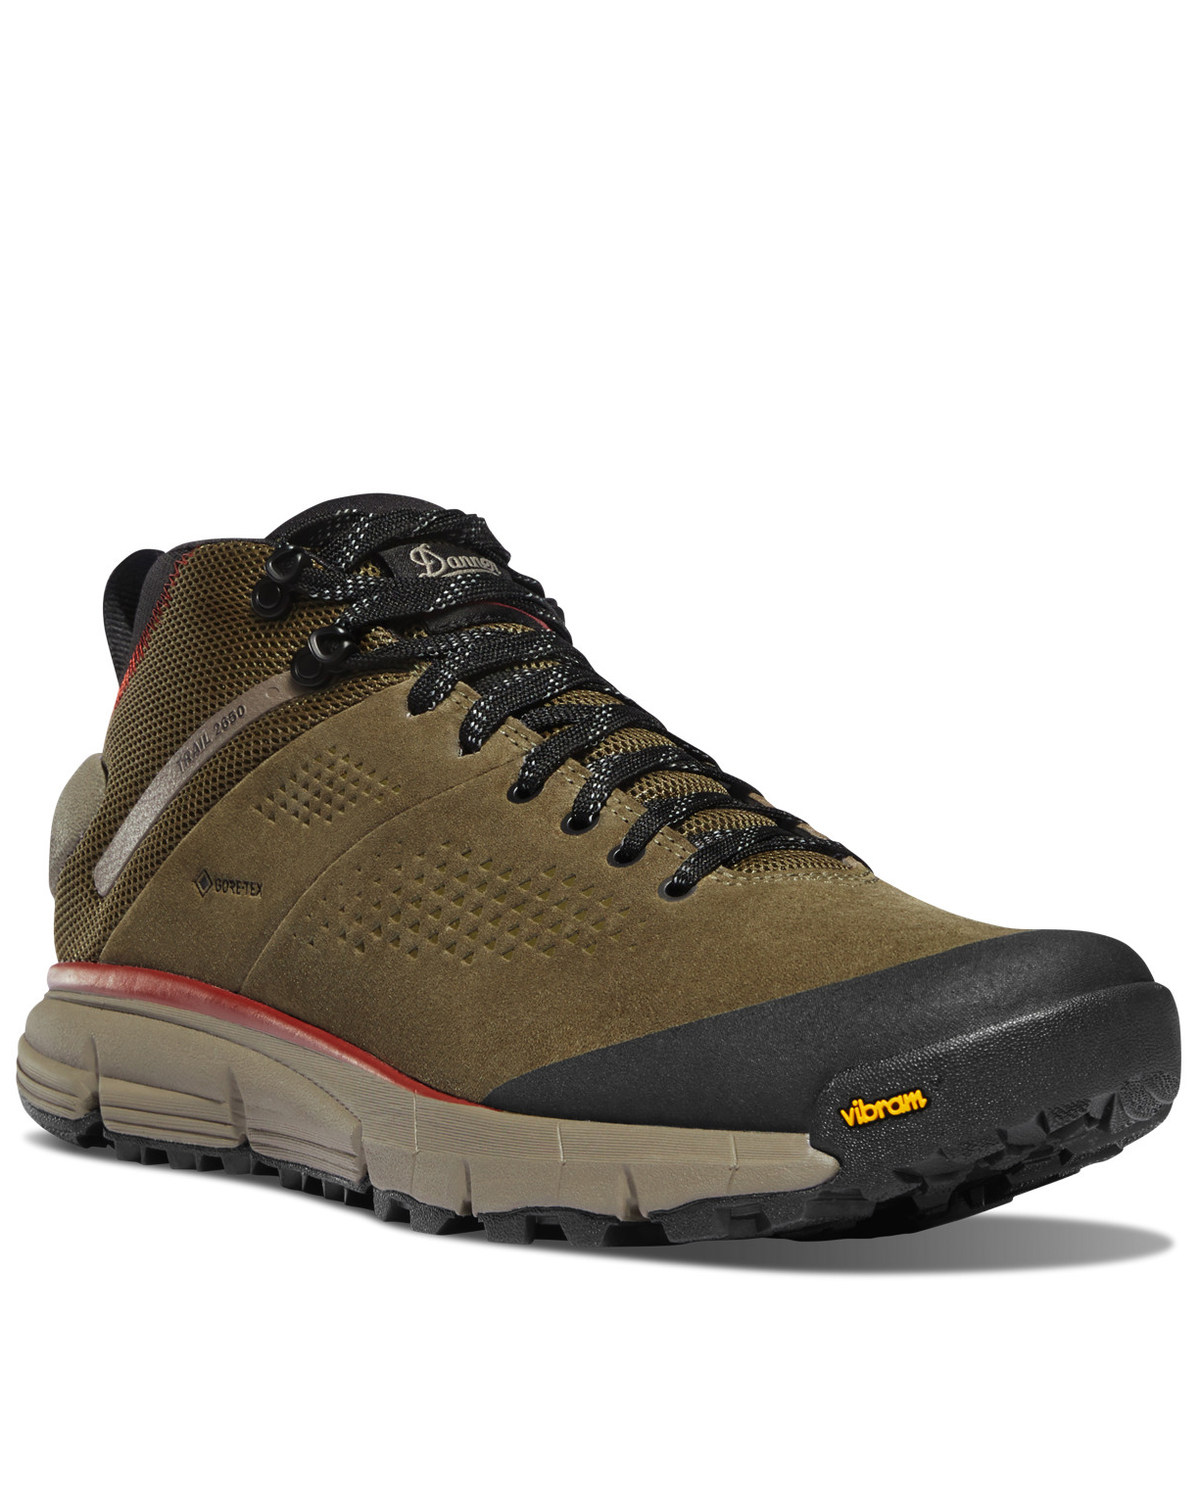 Danner Men's Trail 2650 GTX Dusty Olive Hiking Boots - Soft Toe